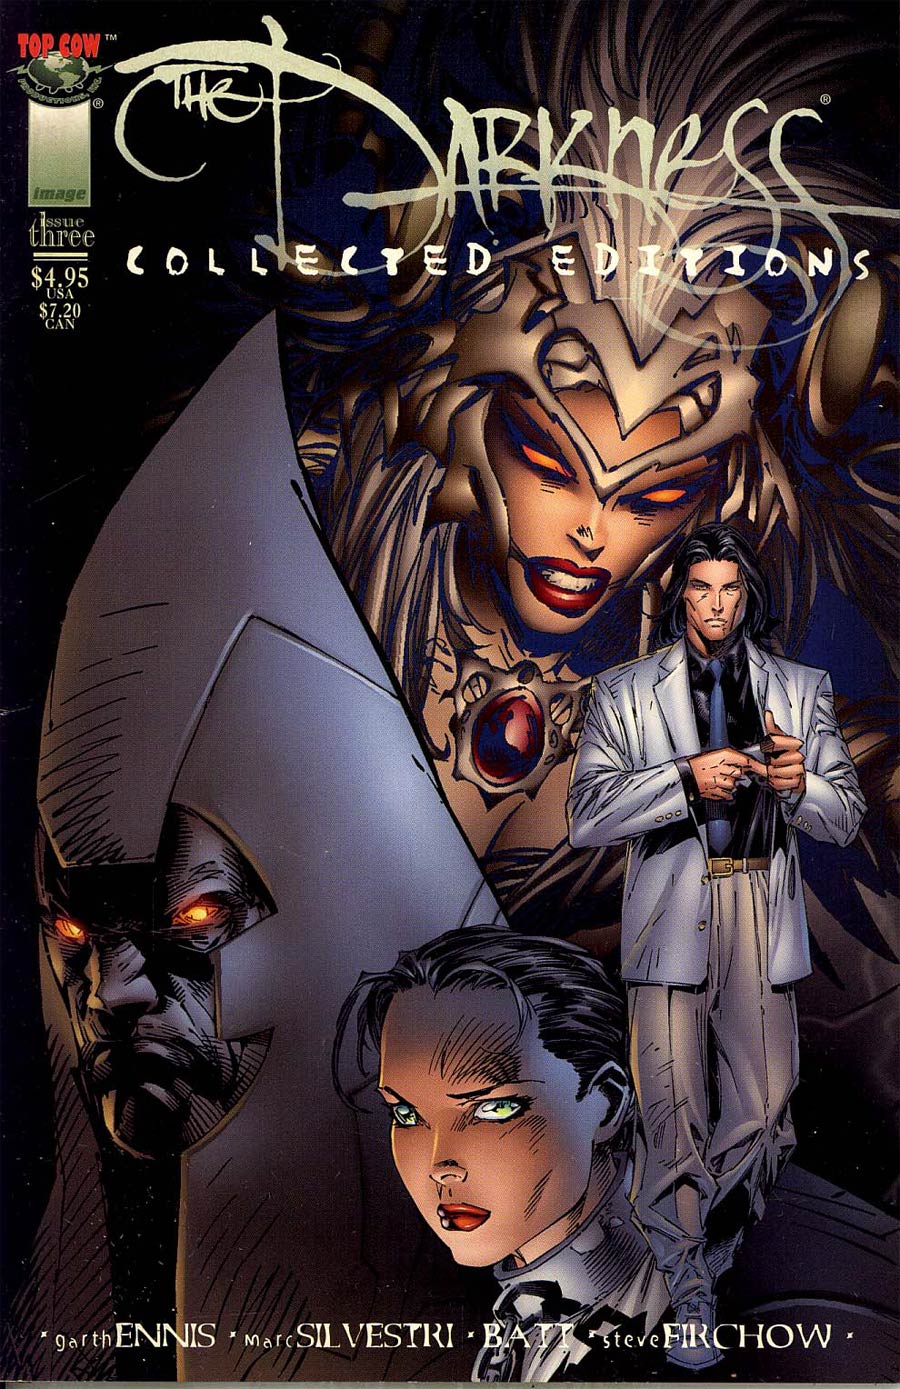 Darkness Collected Editions #3